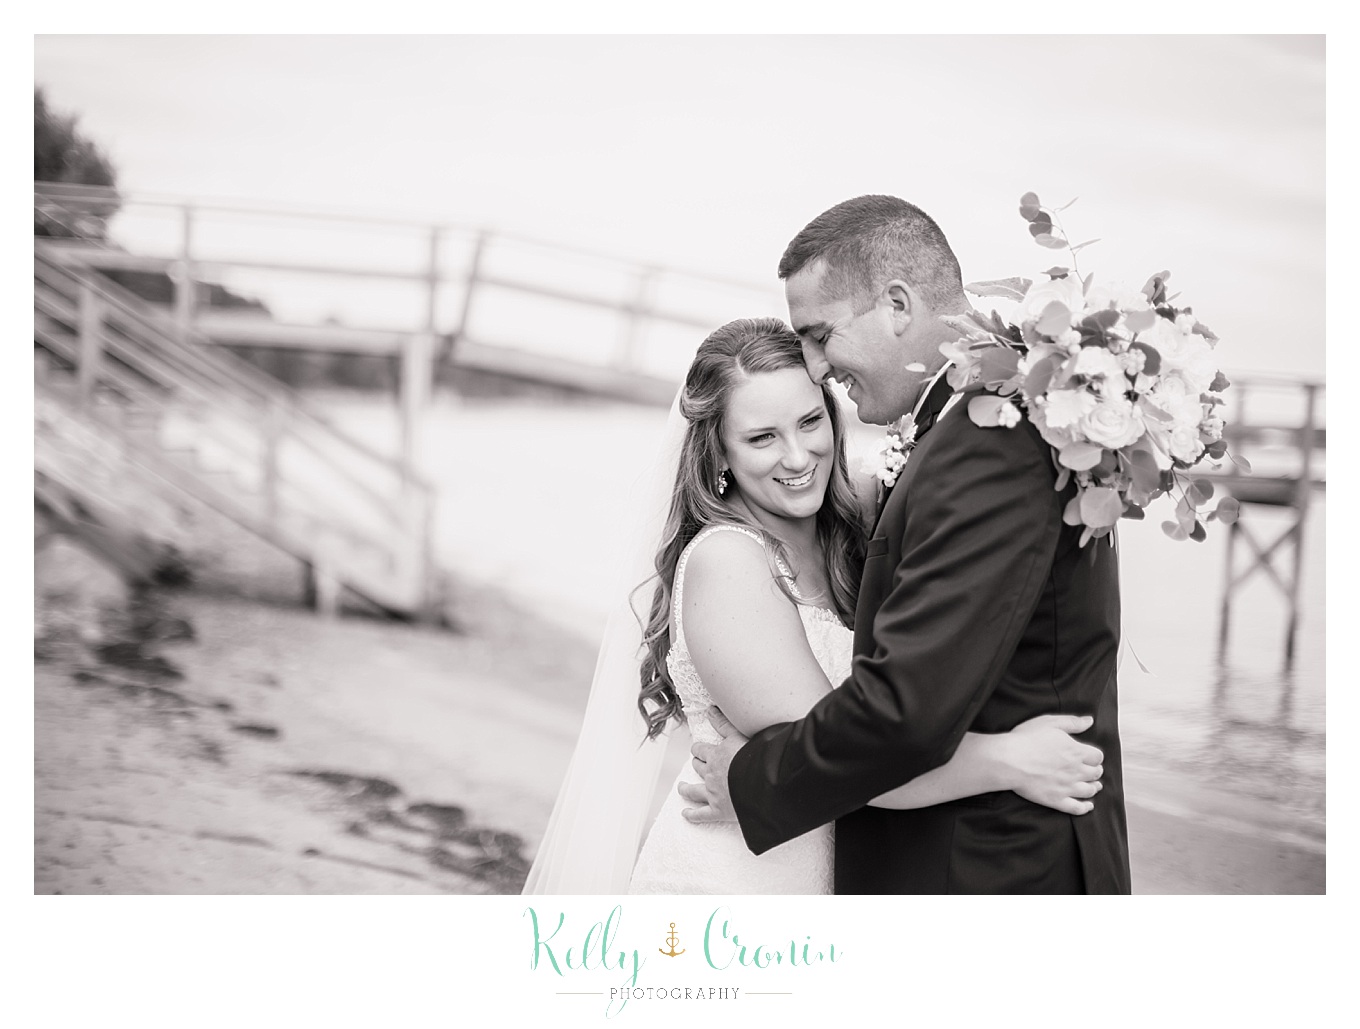 A groom whispers to his bride | Kelly Cronin Photography | Cape Cod Wedding Photographer